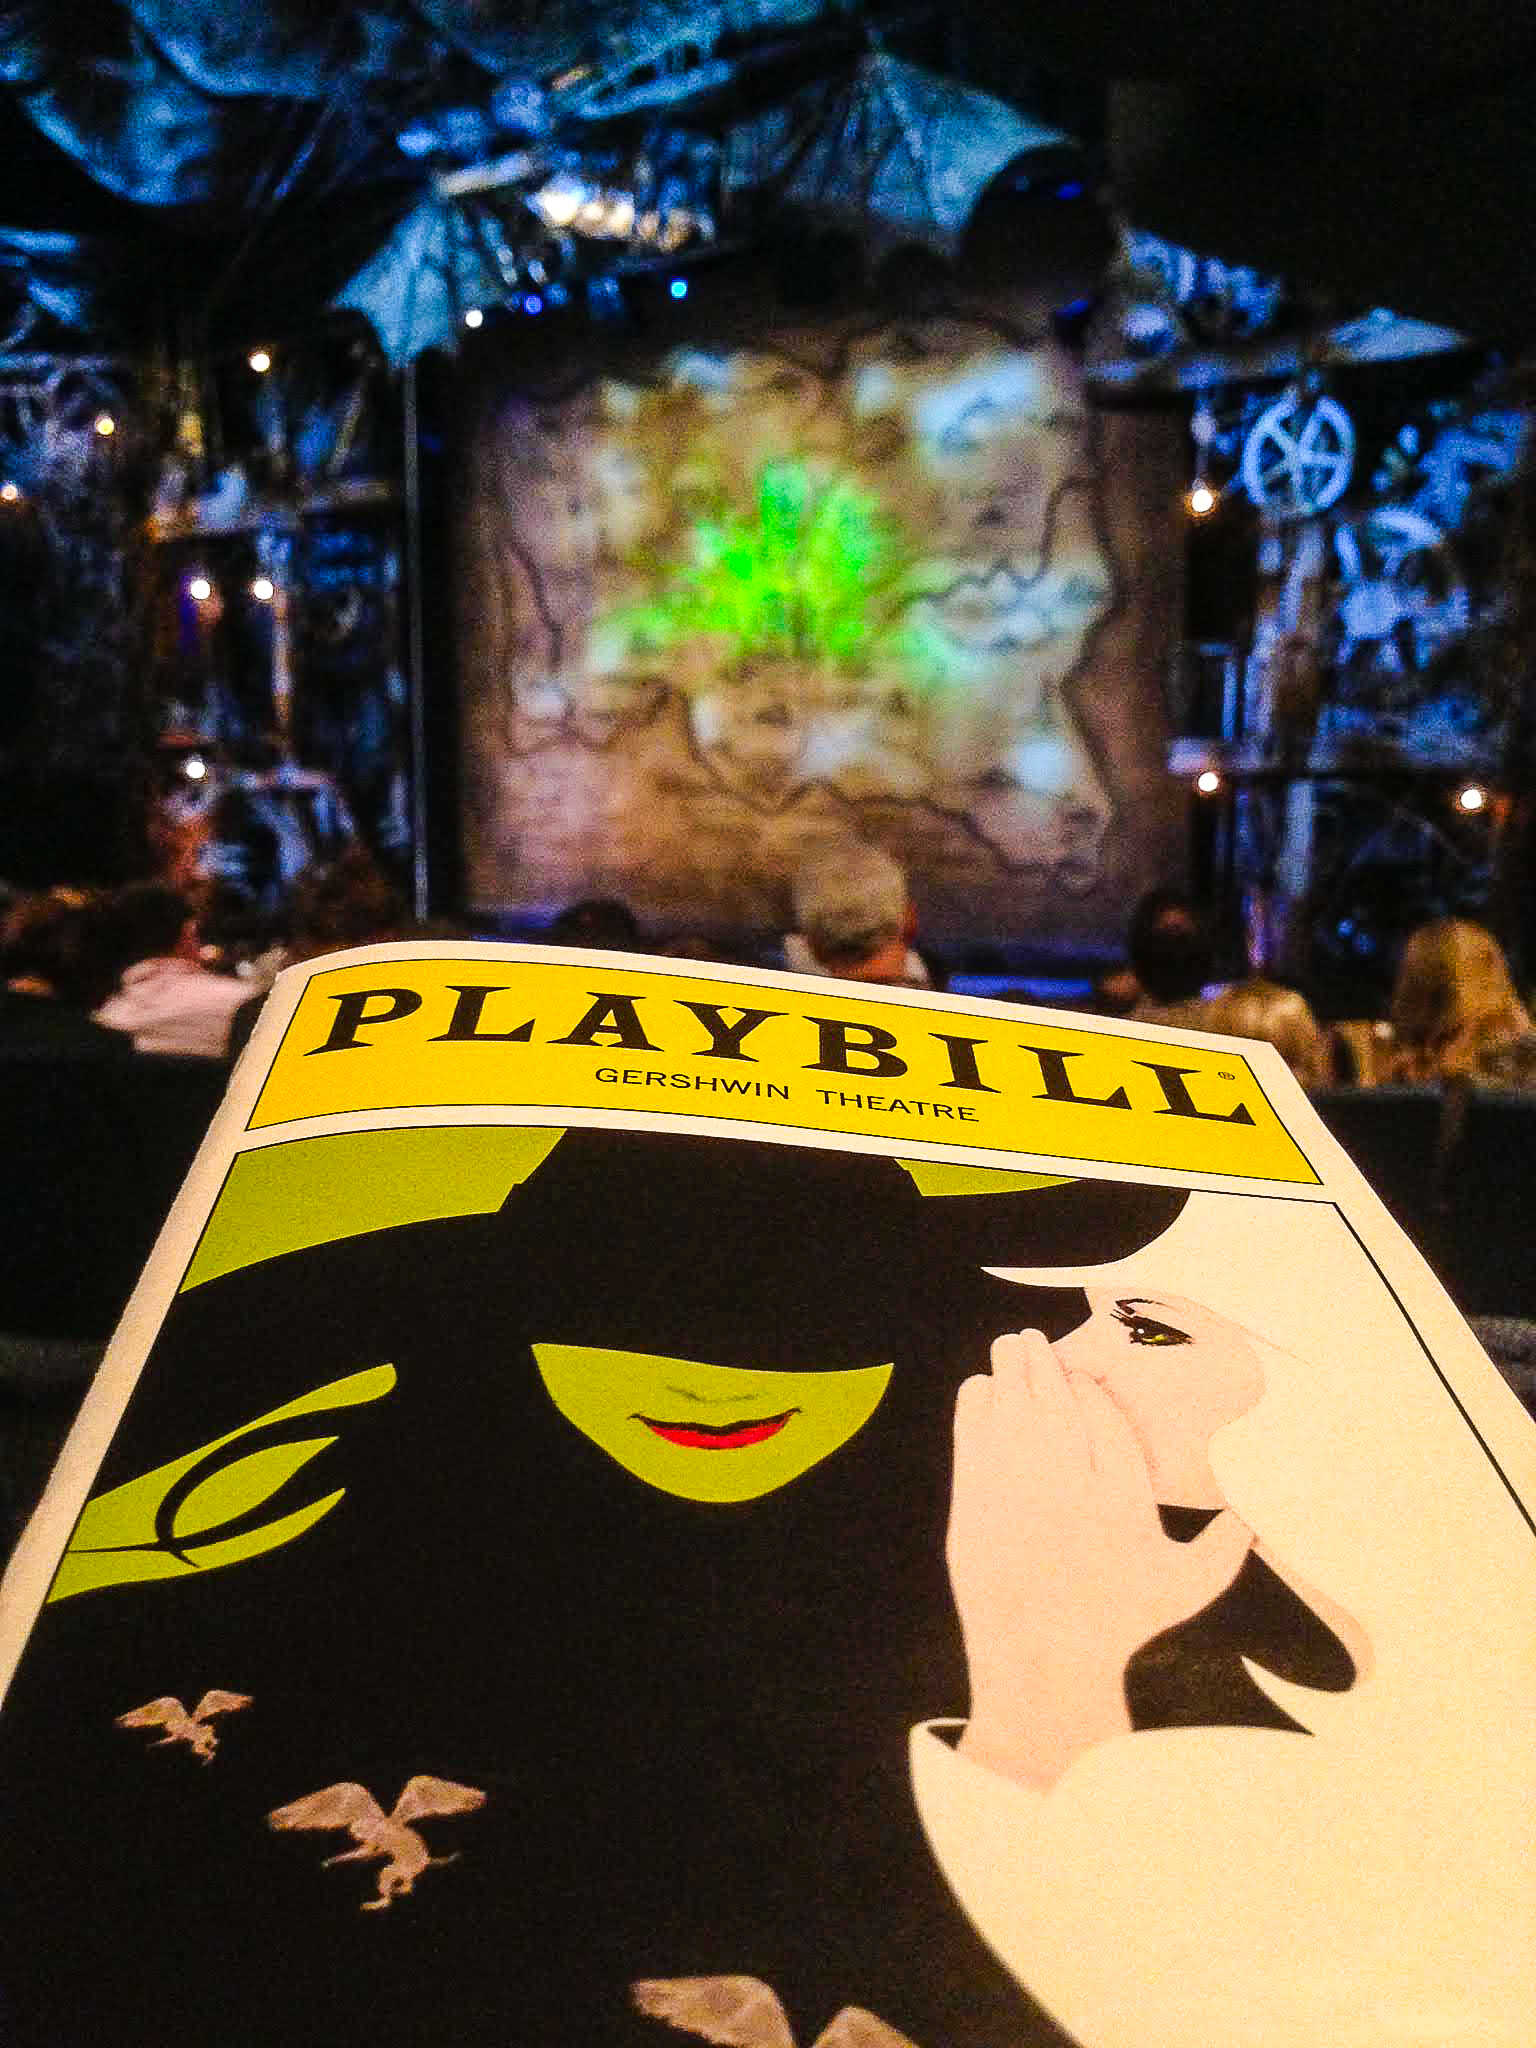 This is an image of the Broadway Playbill for Wicked in front of the stage at The Gershwin Theater in New York City - From big, bright classic American musicals to intimidate plays to more experimental works. New York theatre is one of a kind and worth experiencing, even just once. These are my best tips for attending a Broadway show and for how to buy Broadway tickets.